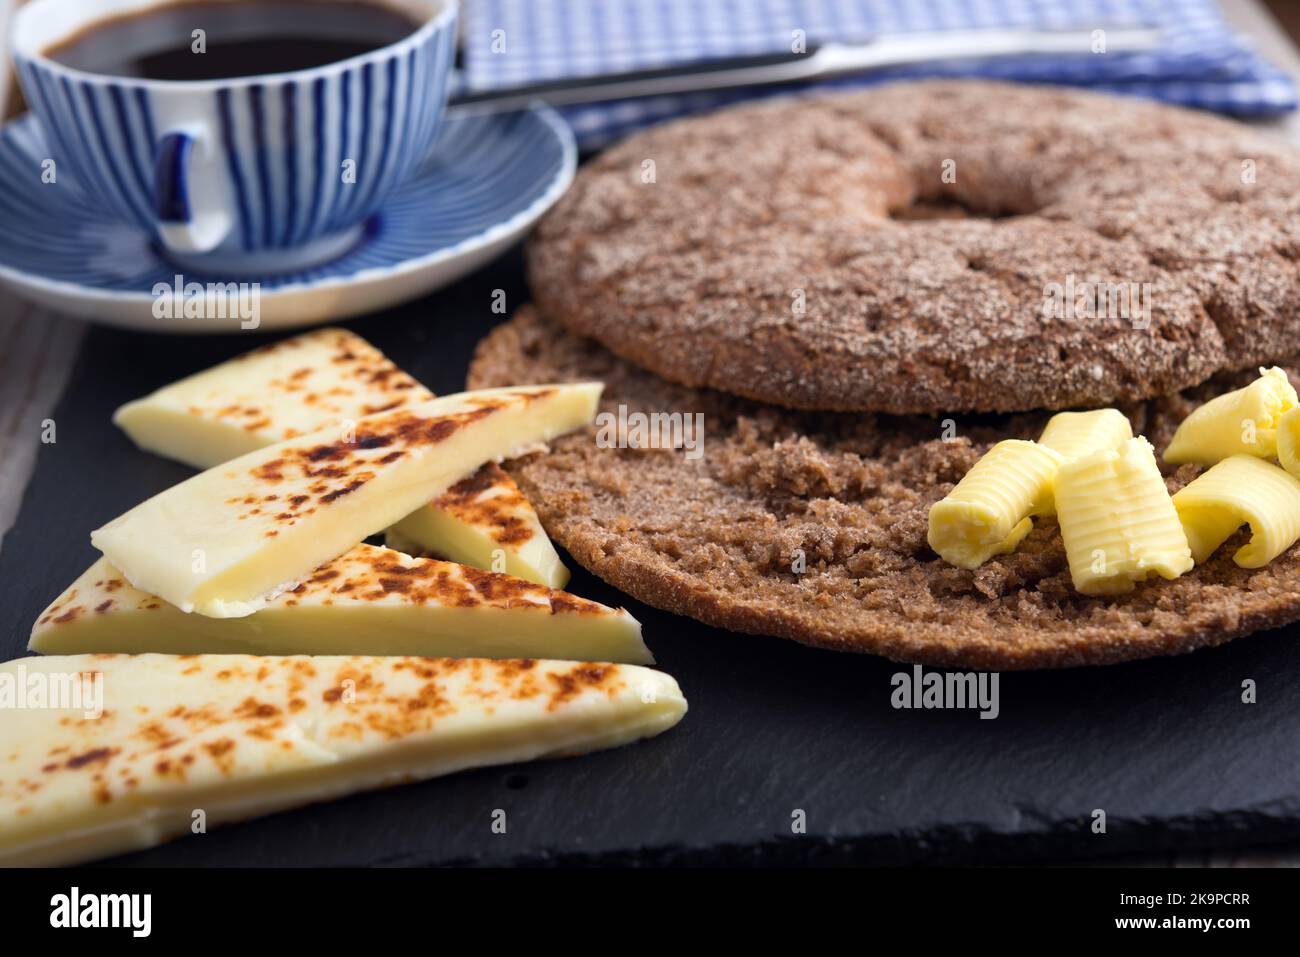 Finnish breakfast with mini farmer cheeses Leipajuusto, butter, hole bread Reikaleipa, and a cup of coffee Stock Photo